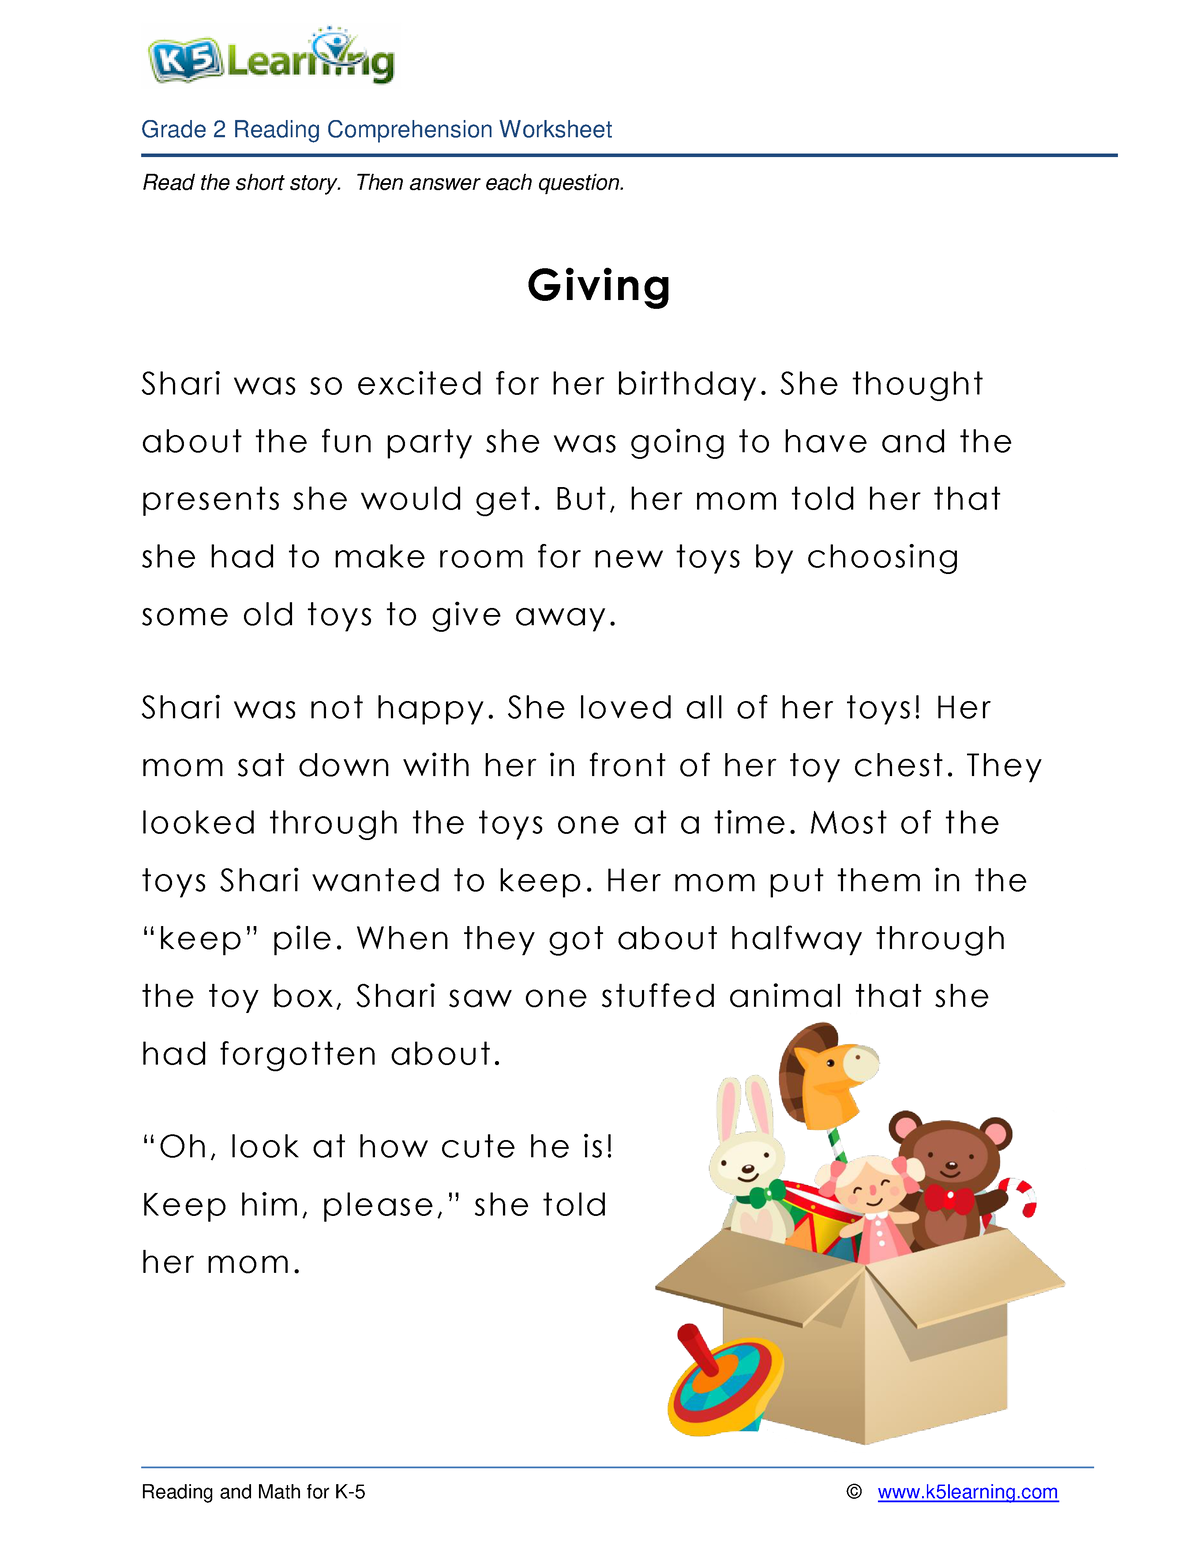 2nd-grade-2-reading-giving-read-the-short-story-then-answer-each